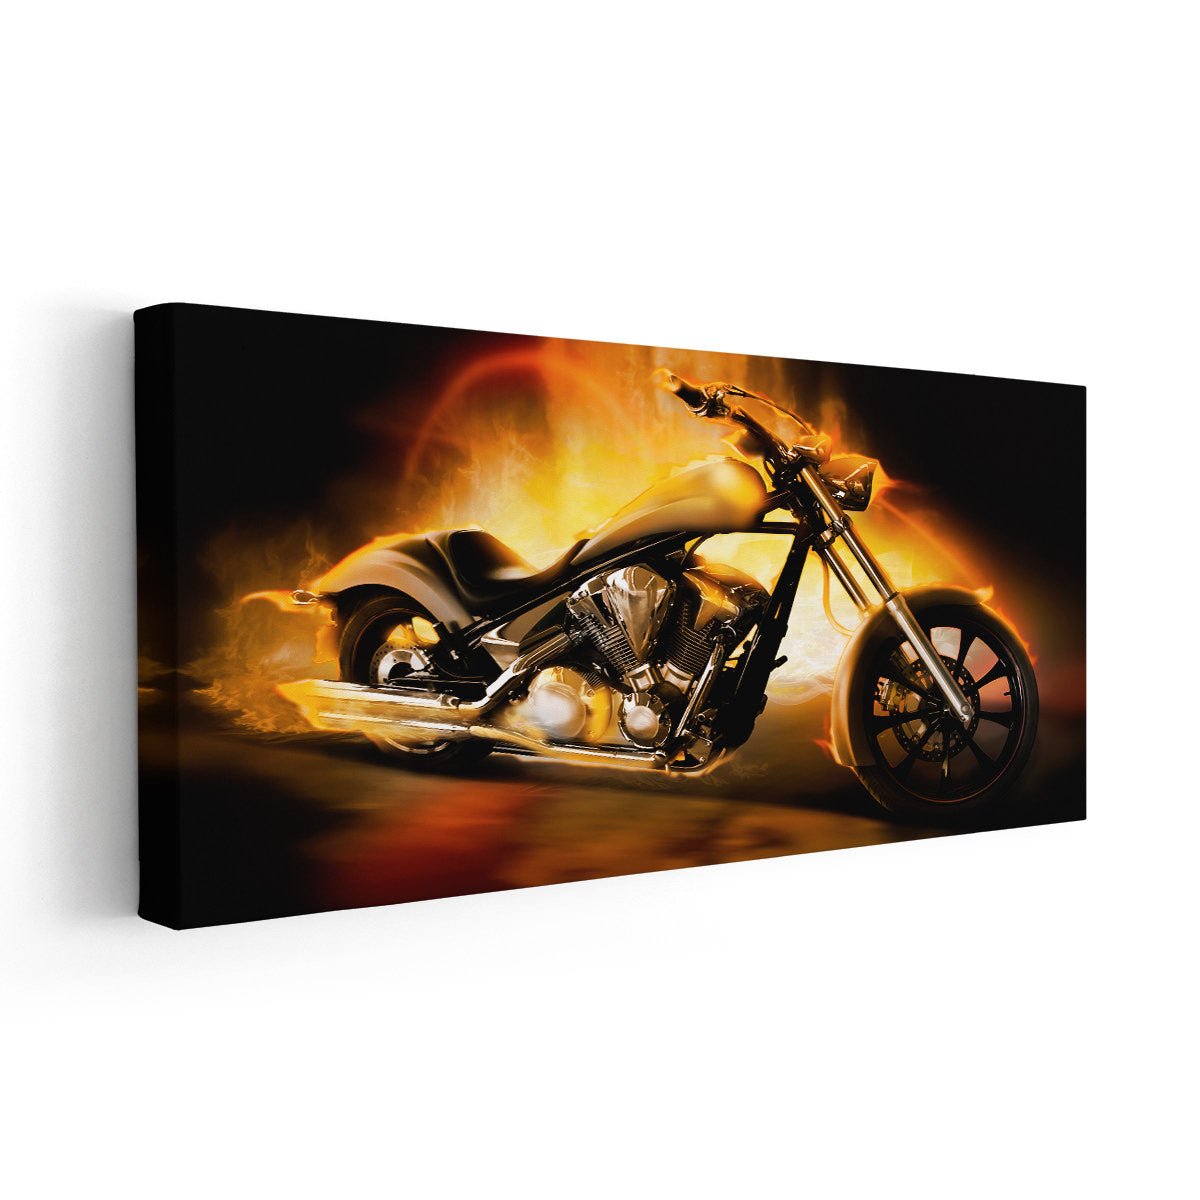 Chopper Motorcycle In Flames Canvas Wall Art